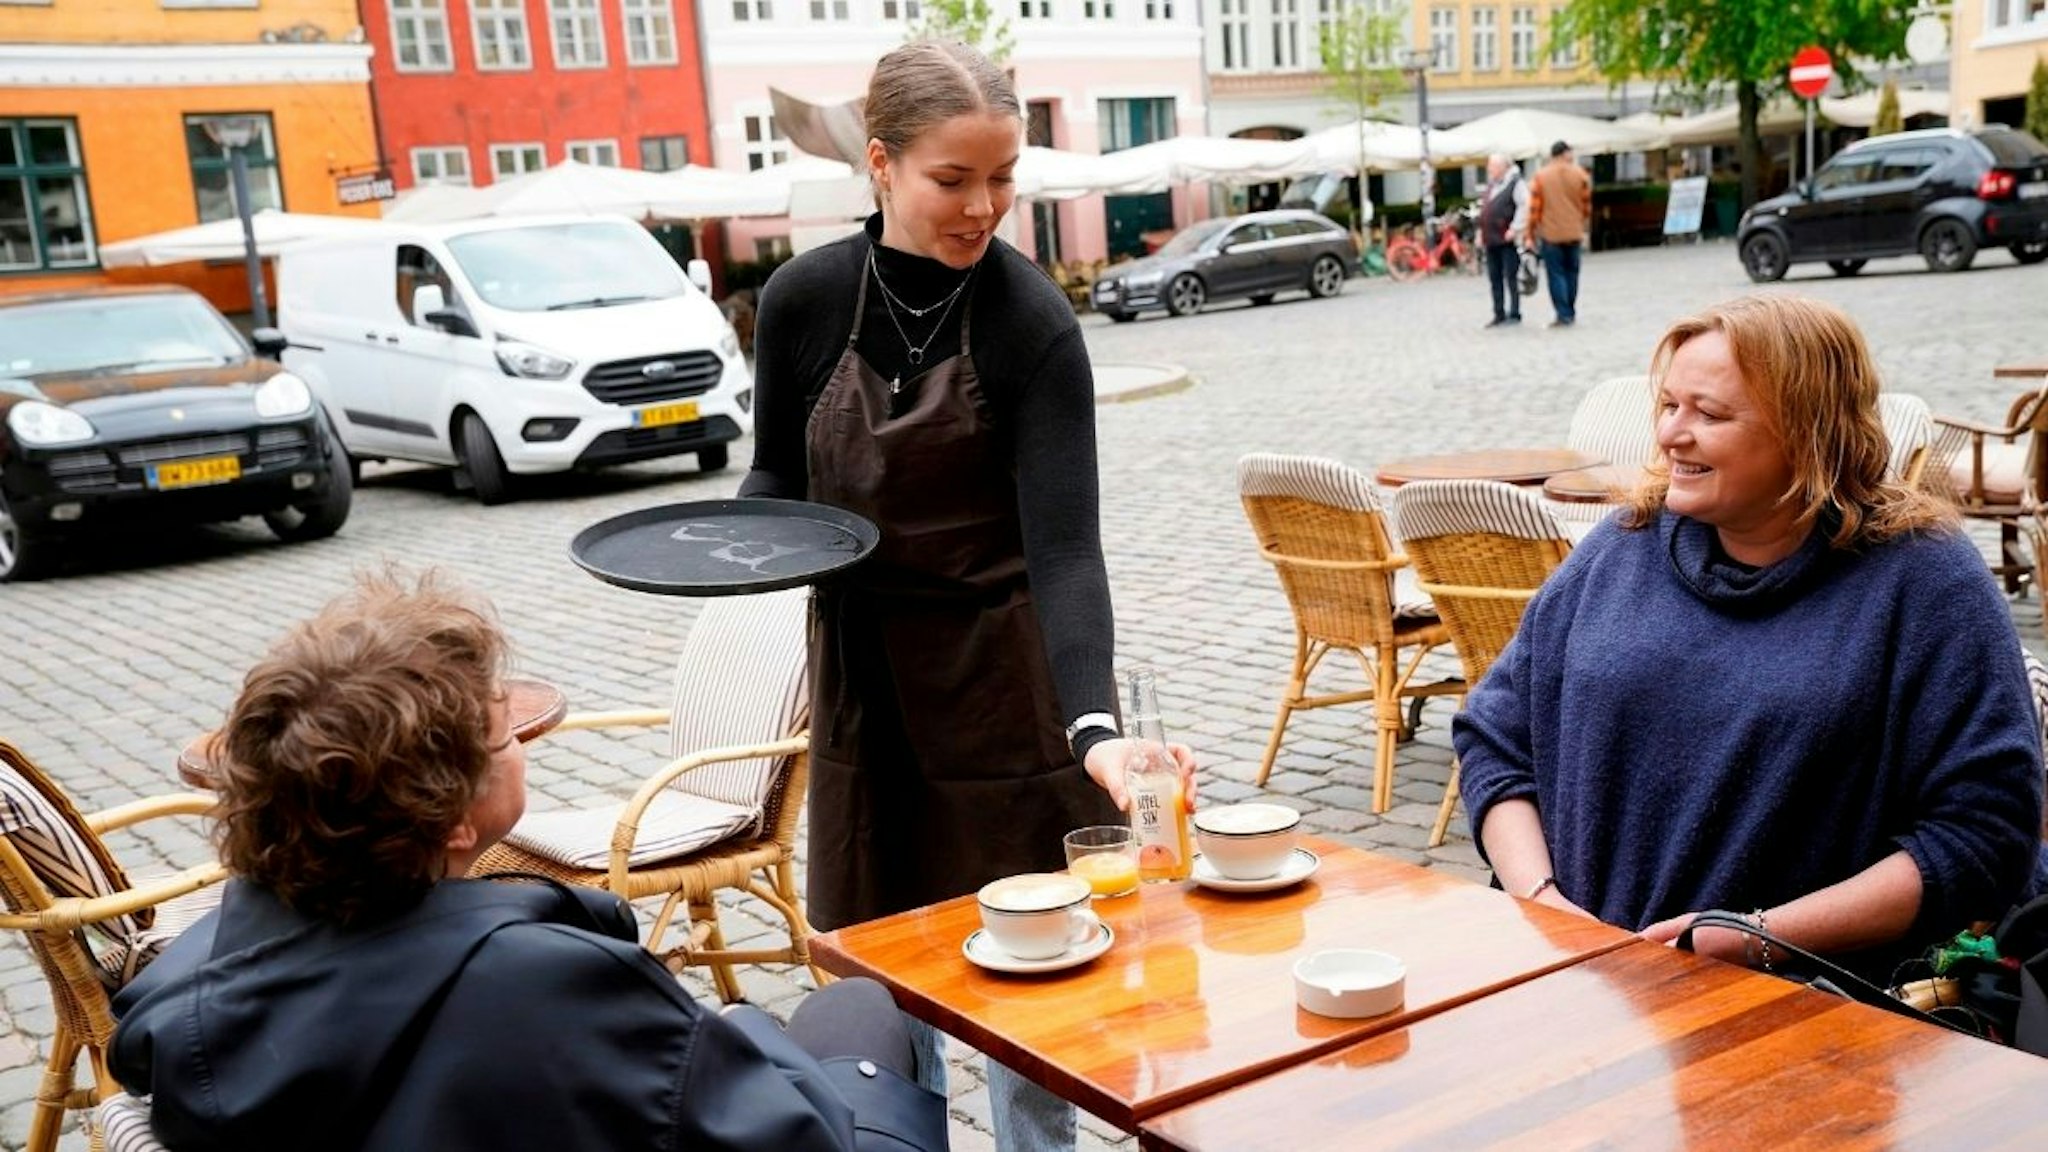 People sit at the terrasse of the Huks Fluks restaurant after it reopened at Graabroedre Square in Copenhagen on May 18, 2020.